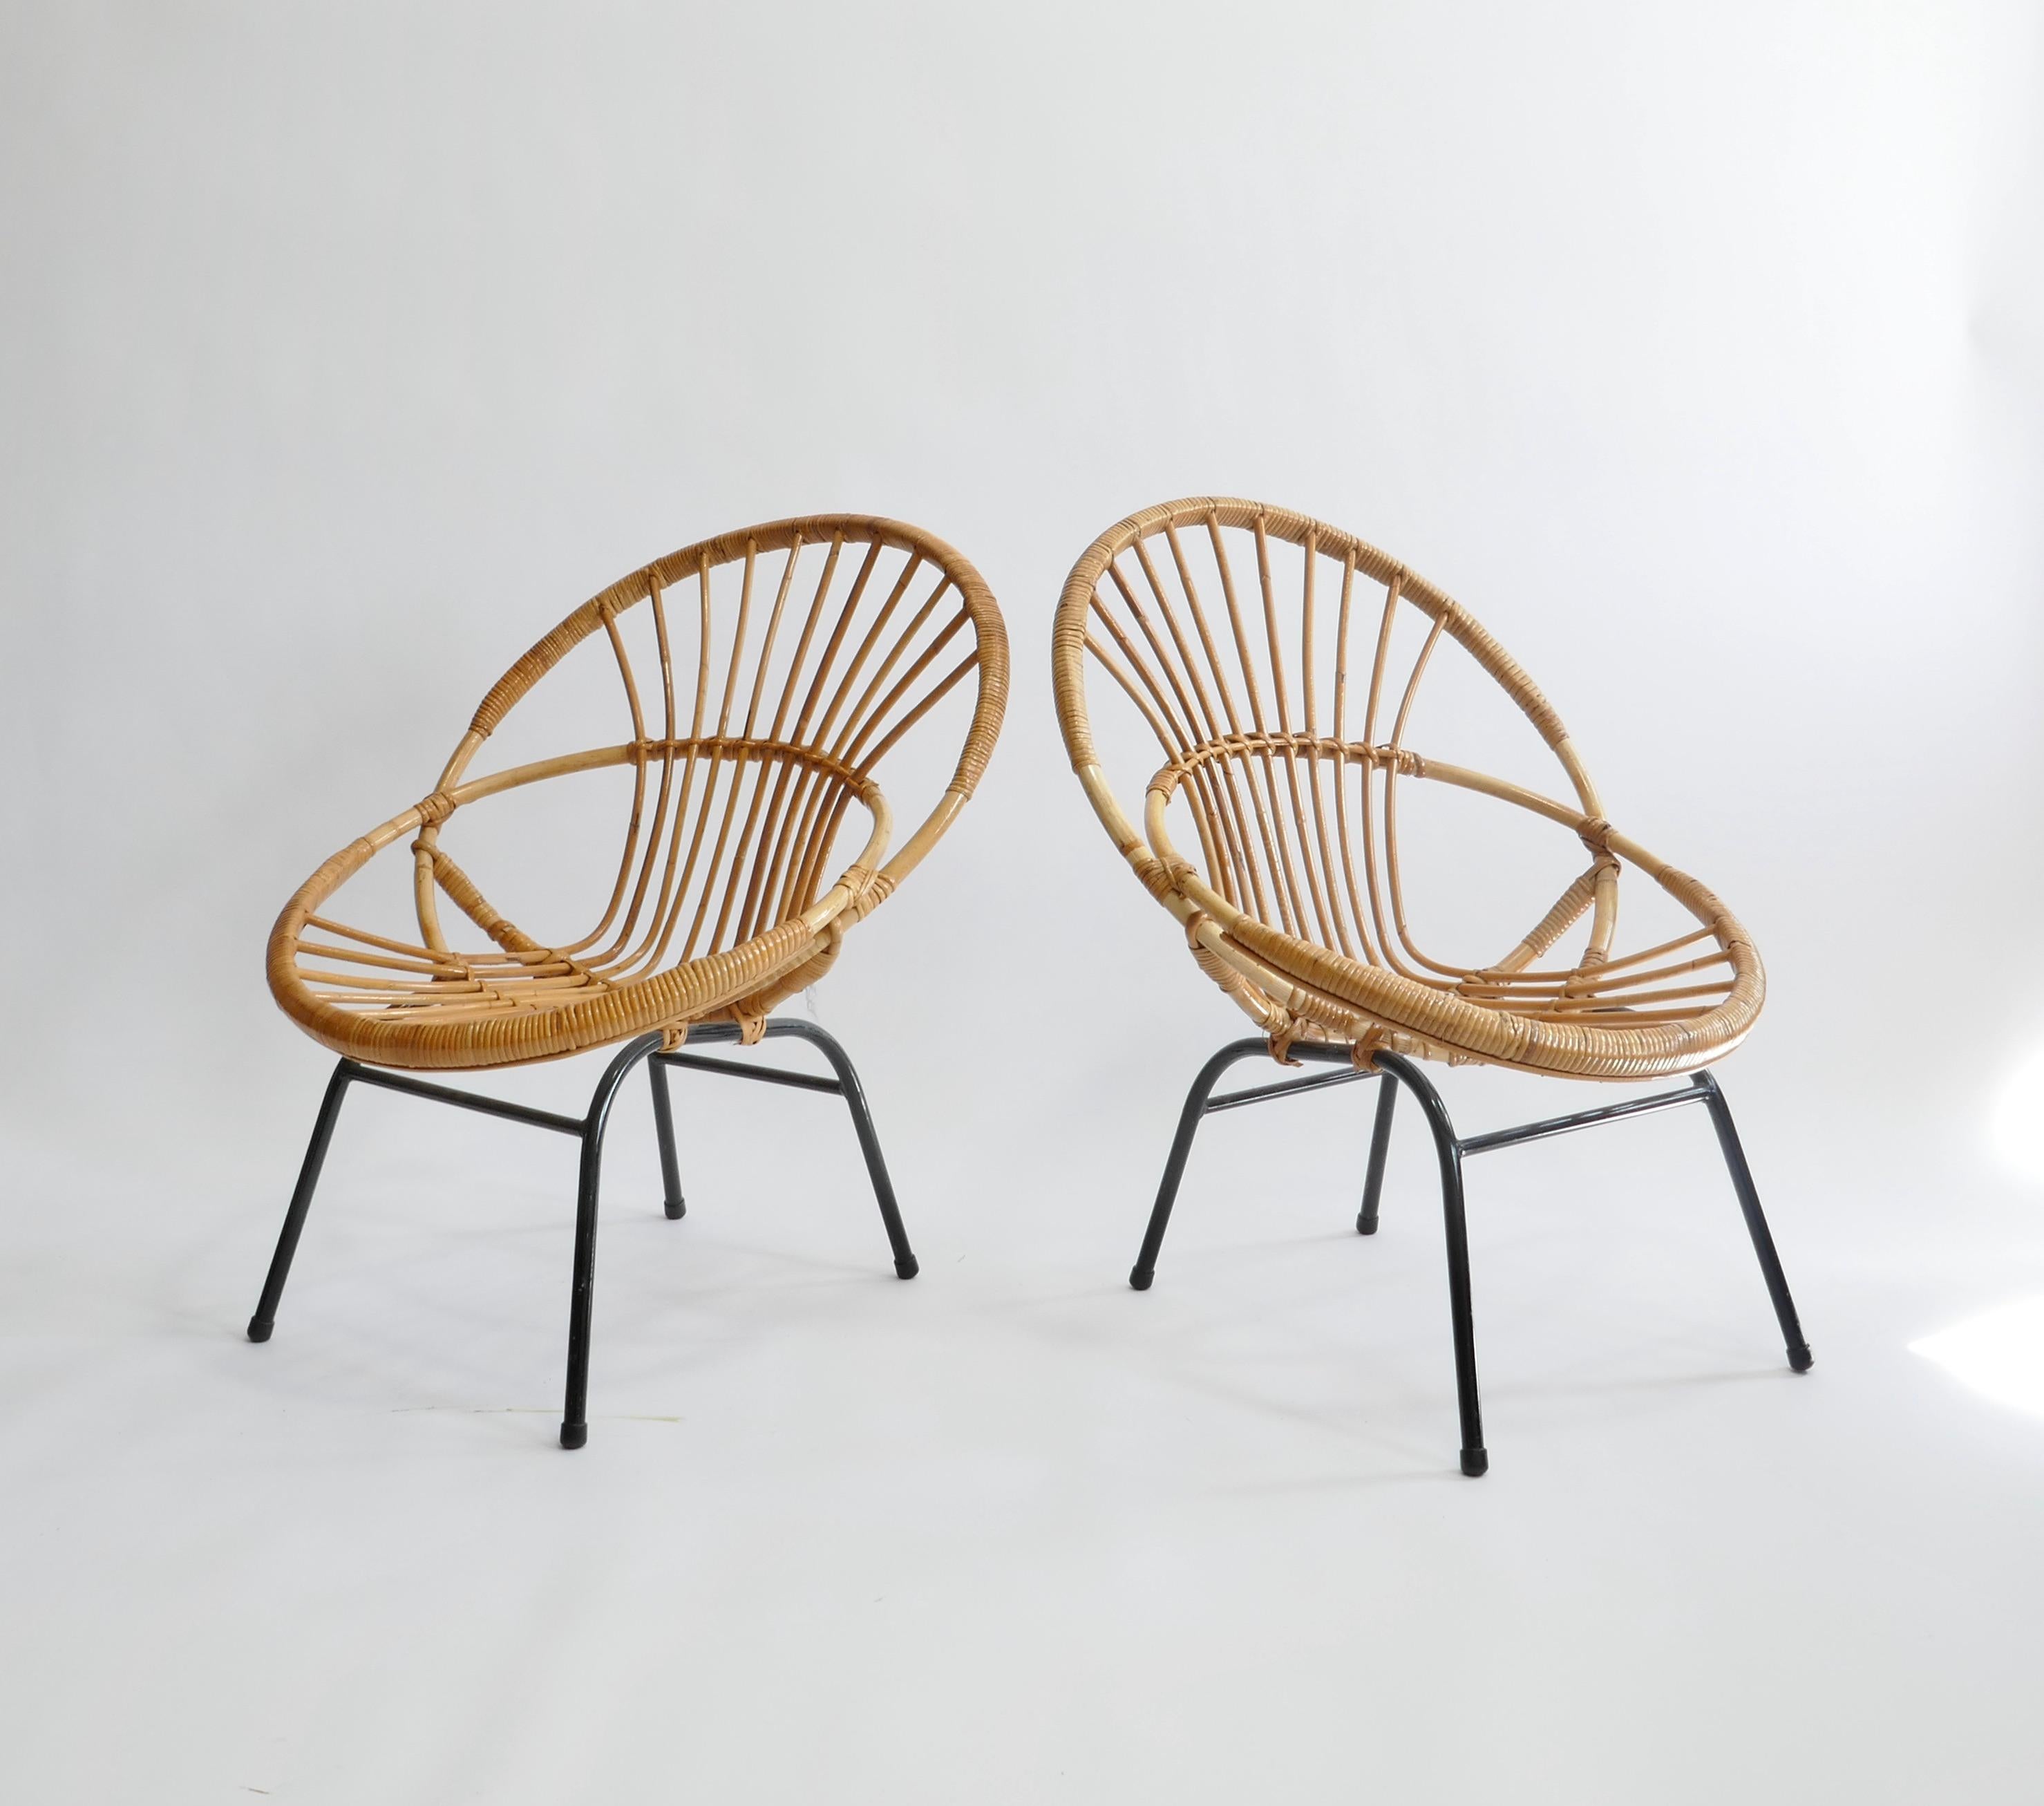 Mid-20th Century Pair of French Mid-Century Rattan Chairs, France 1950s For Sale